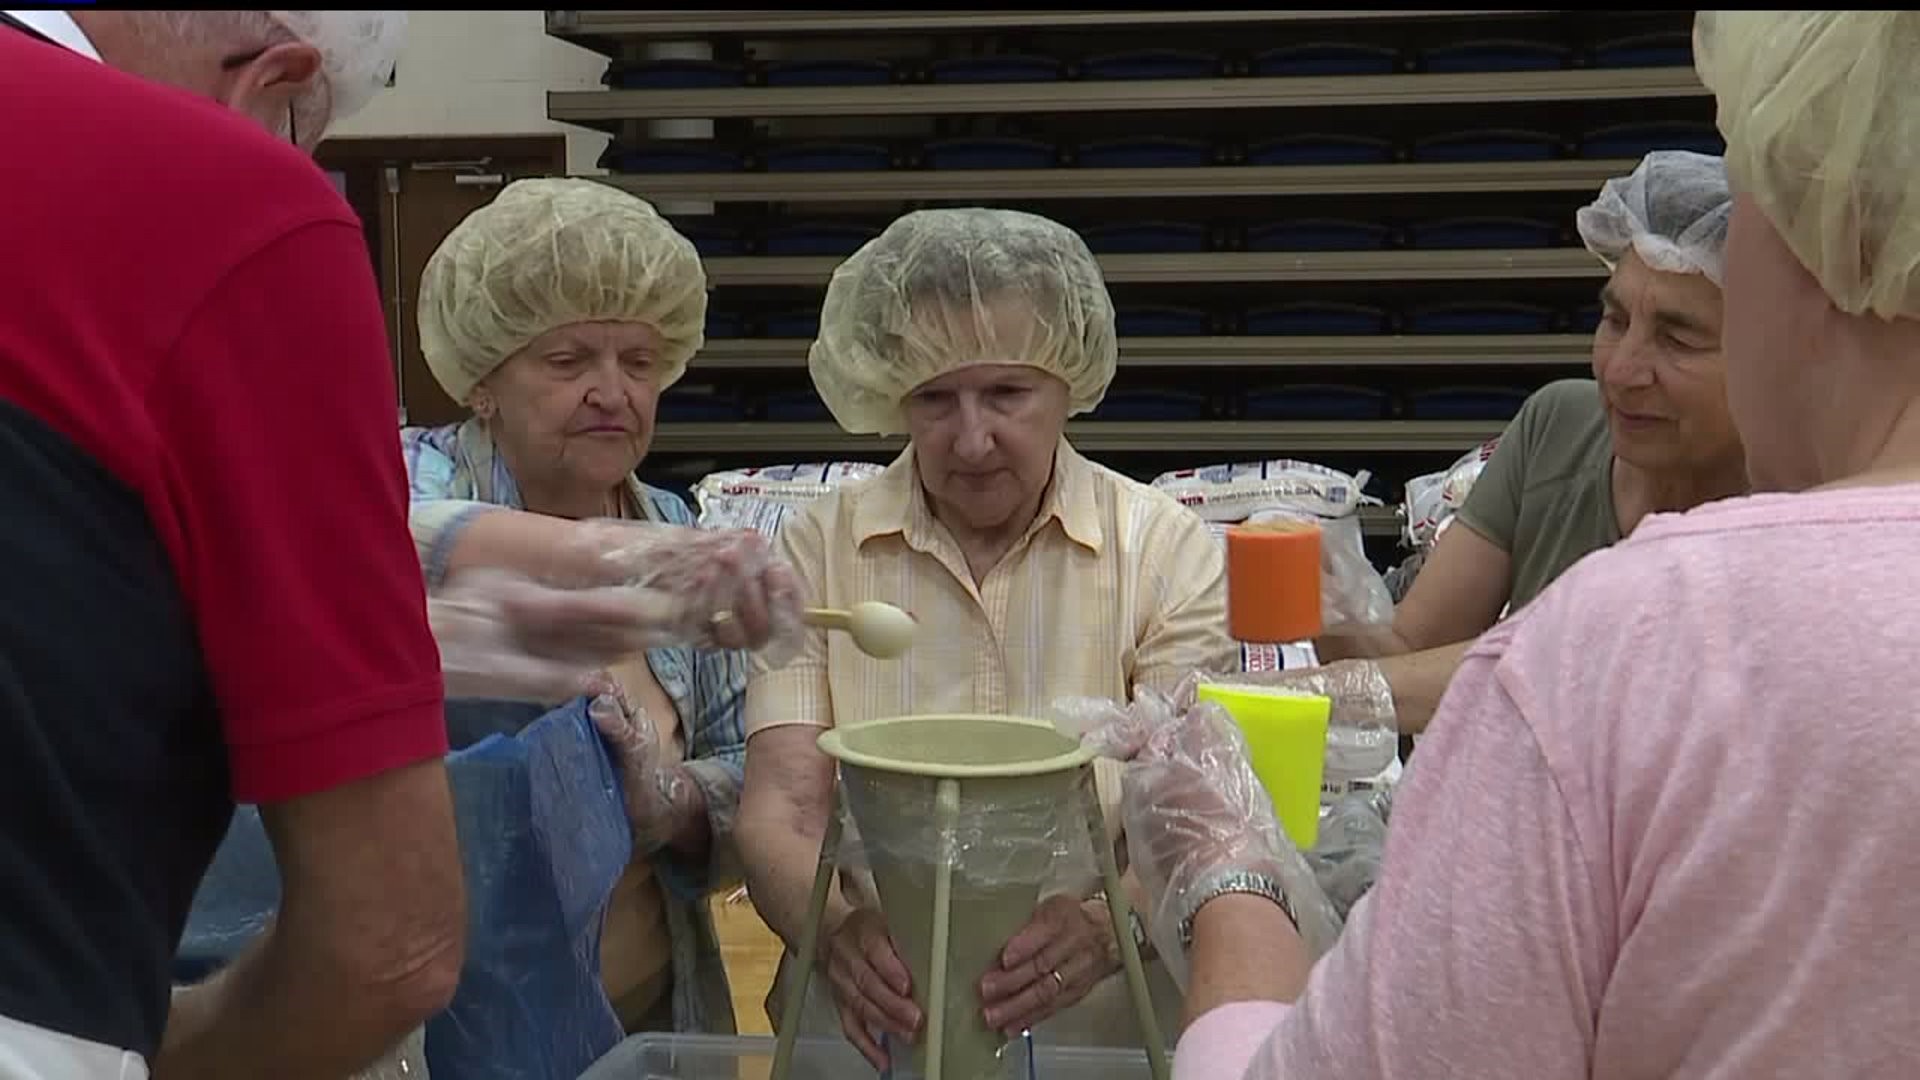 200,000 meals packed by local volunteers; will be shipped to Haiti